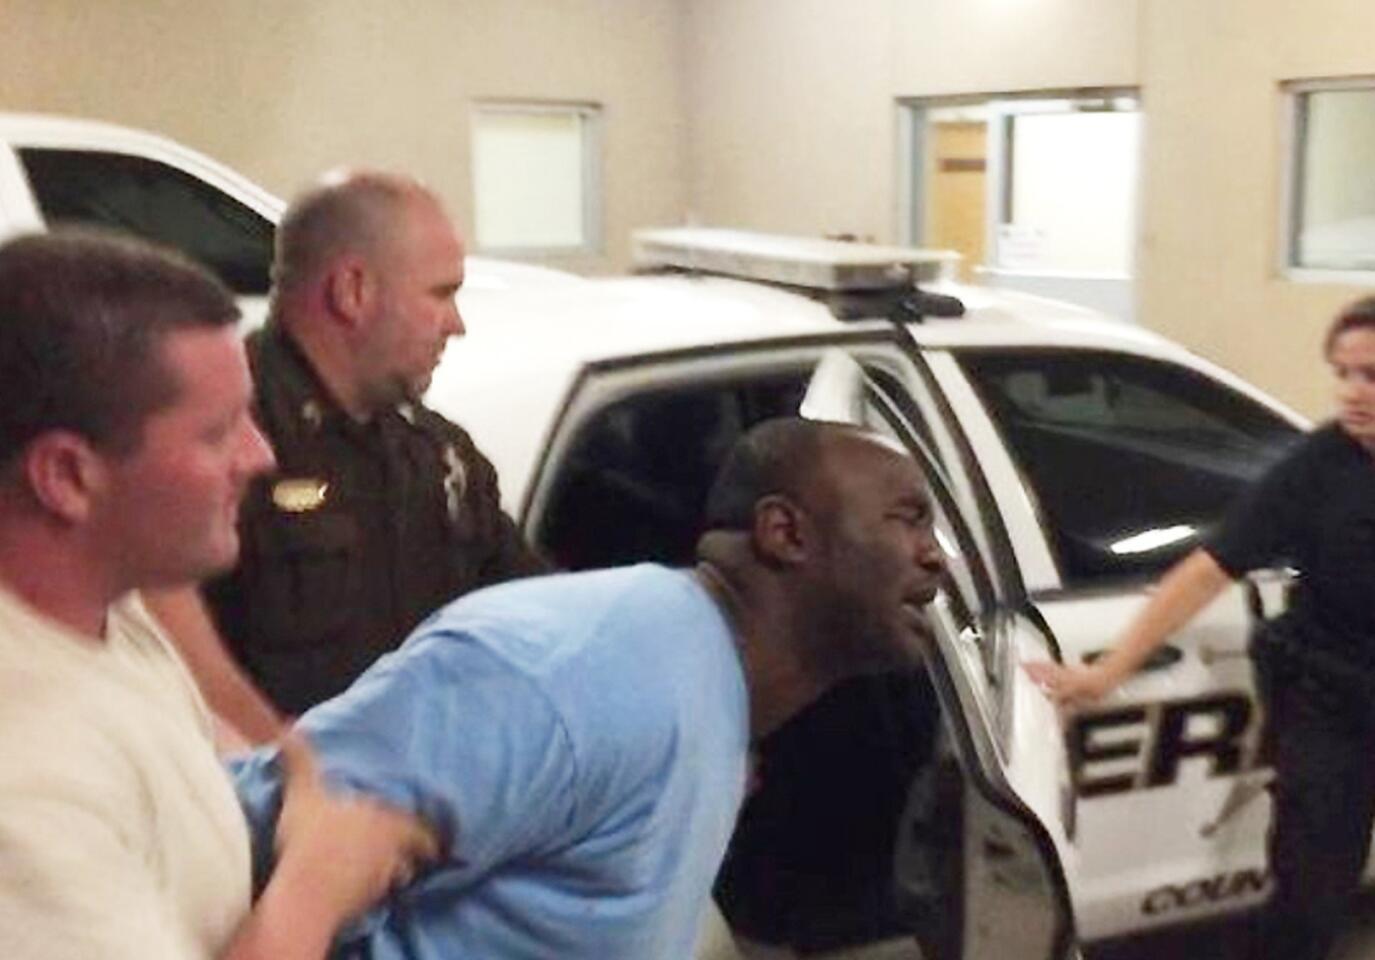 Officers lead Curtis Banks, center, into the Mississippi Highway Patrol office in Hattiesburg, Miss., early Sunday after he was arrested in connection with the fatal shooting of two officers.